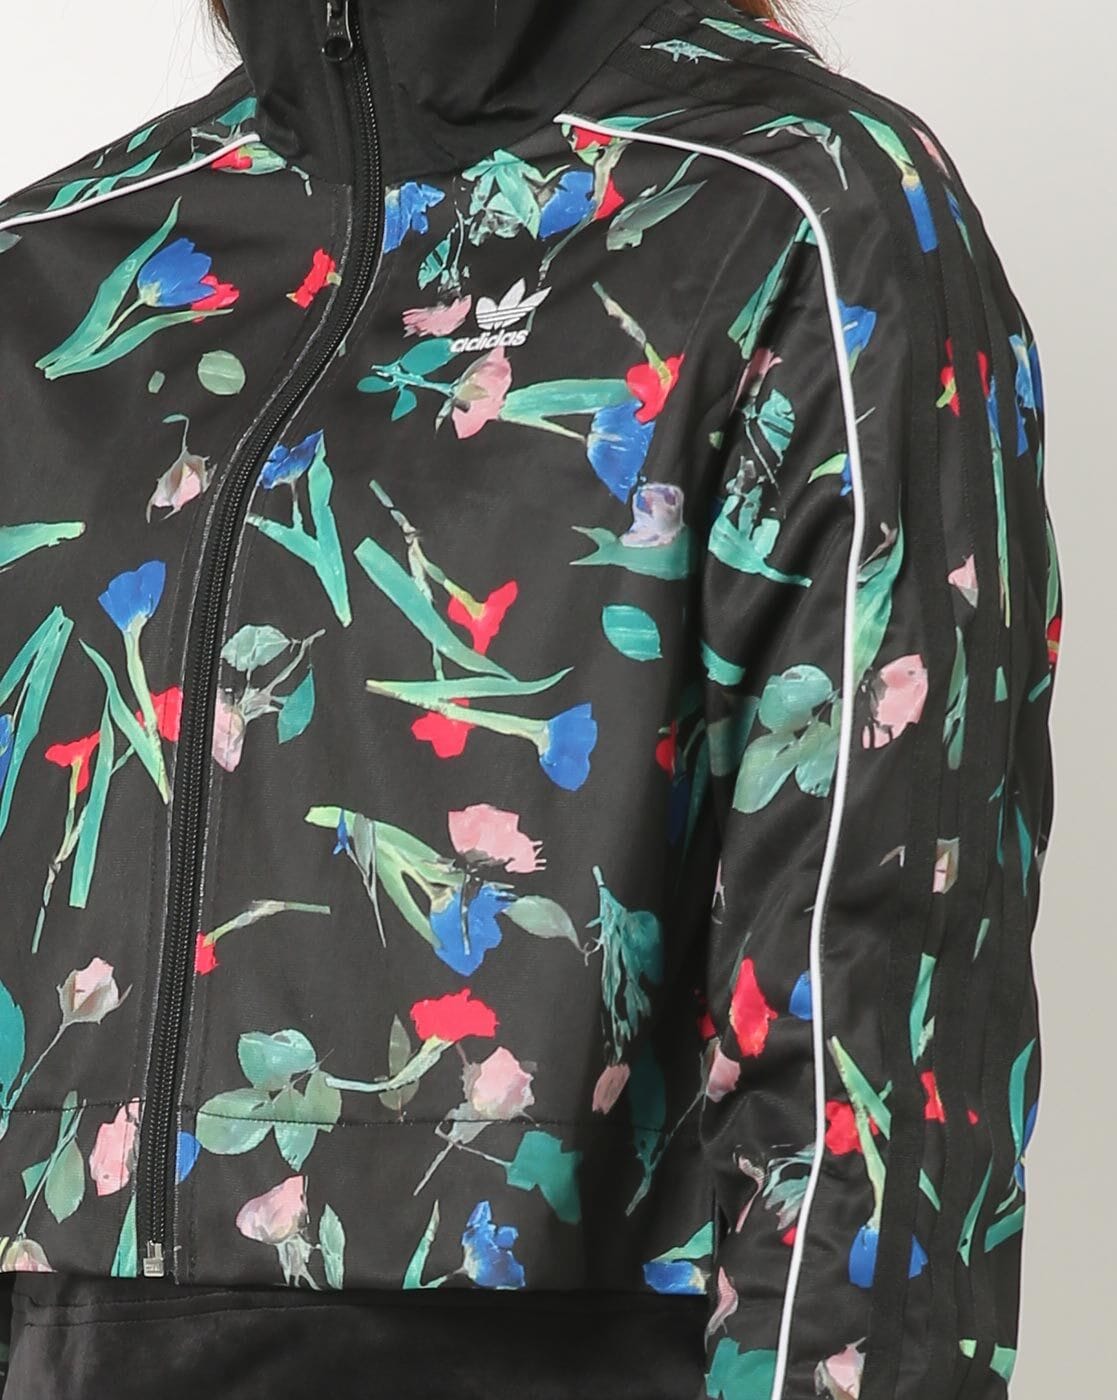 Buy adidas floral jacket women's> OFF-52%